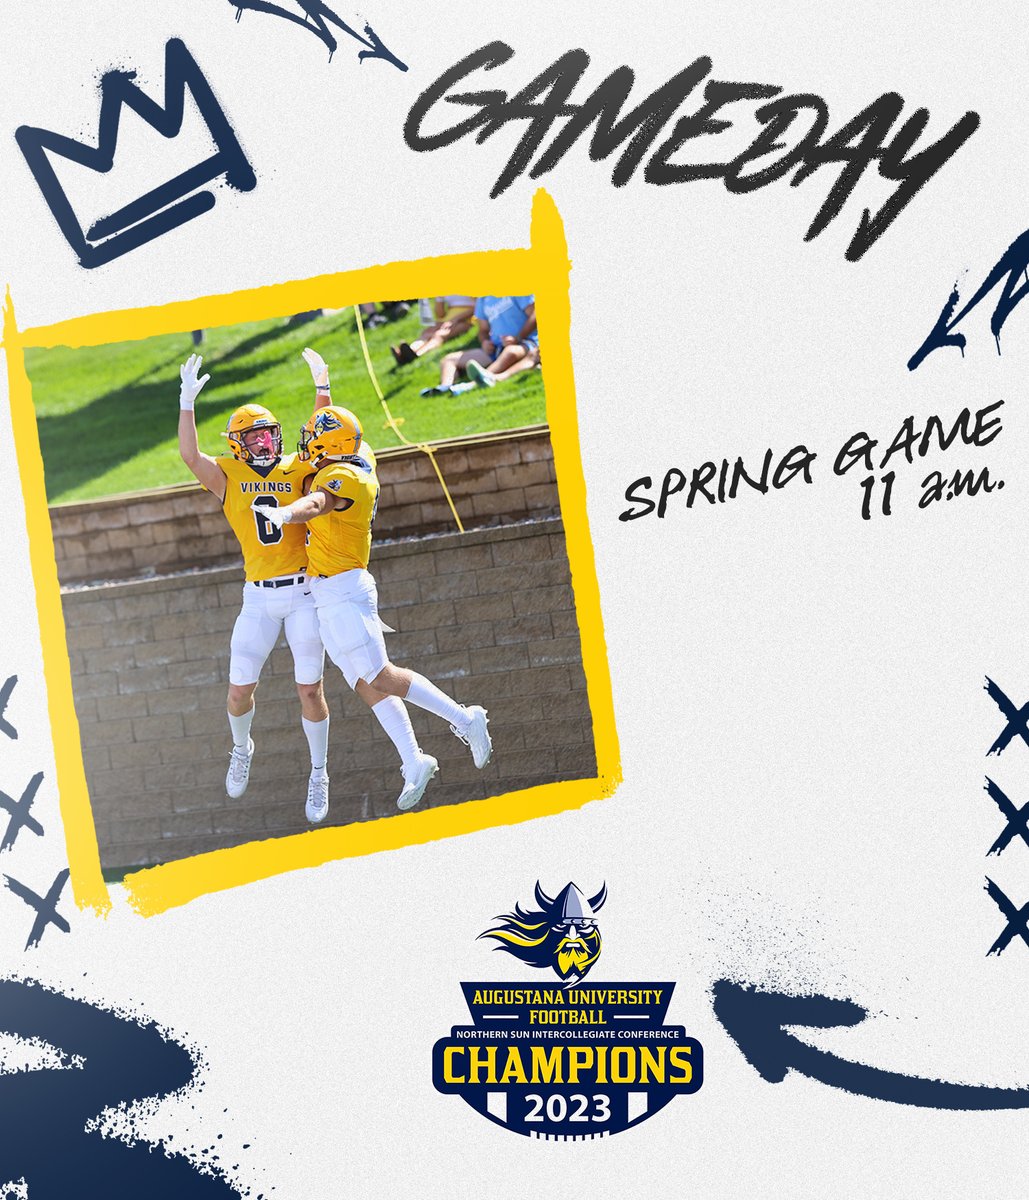 Saturdays are for Football 🏈 We'll play our Spring Game at 11 a.m. at Kirkeby-Over Stadium ⚔️ #BuildingChampions